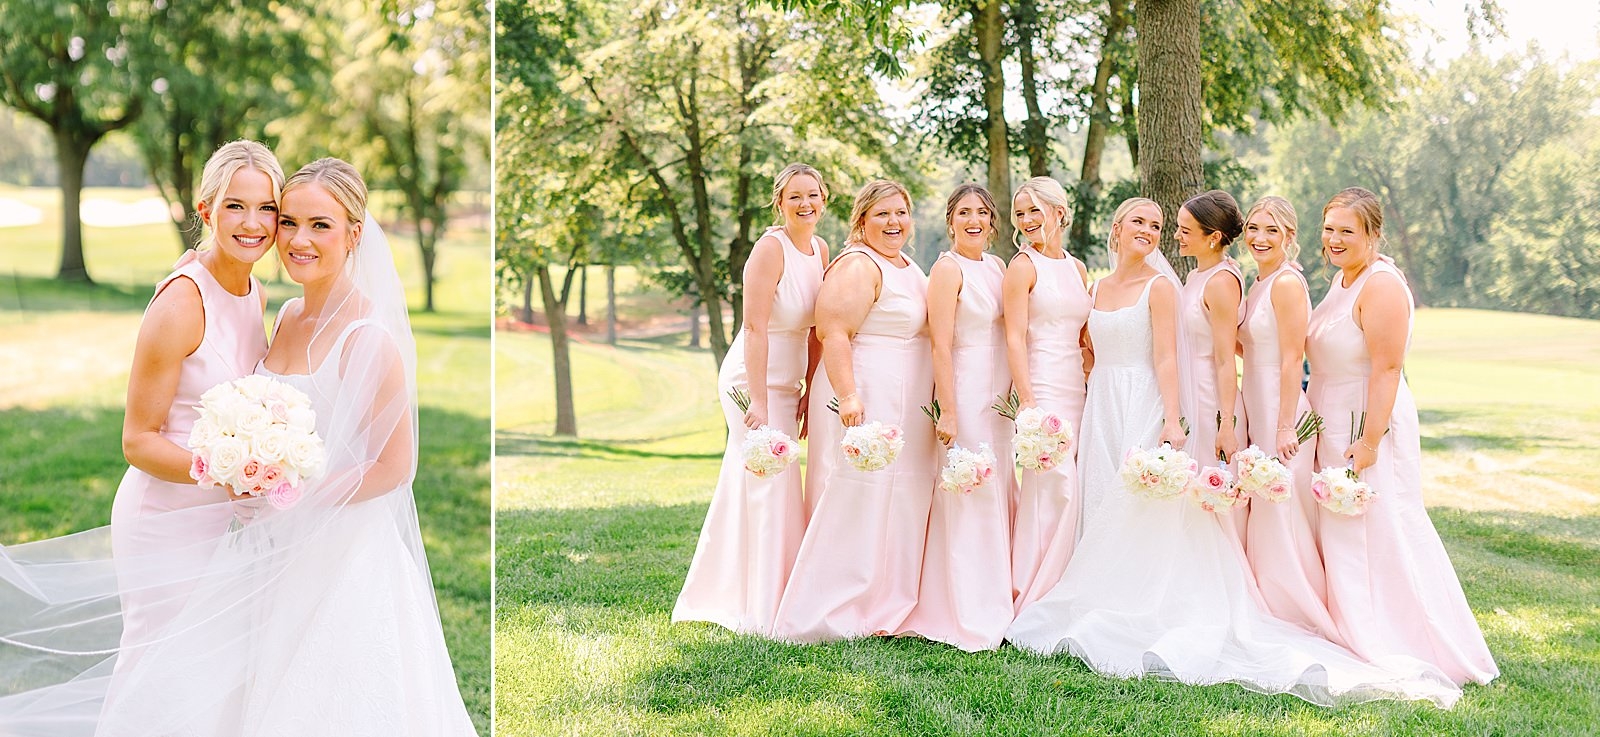 An Evansville Country Club Wedding | Ashley and Beau | Bret and Brandie Photography124.jpg